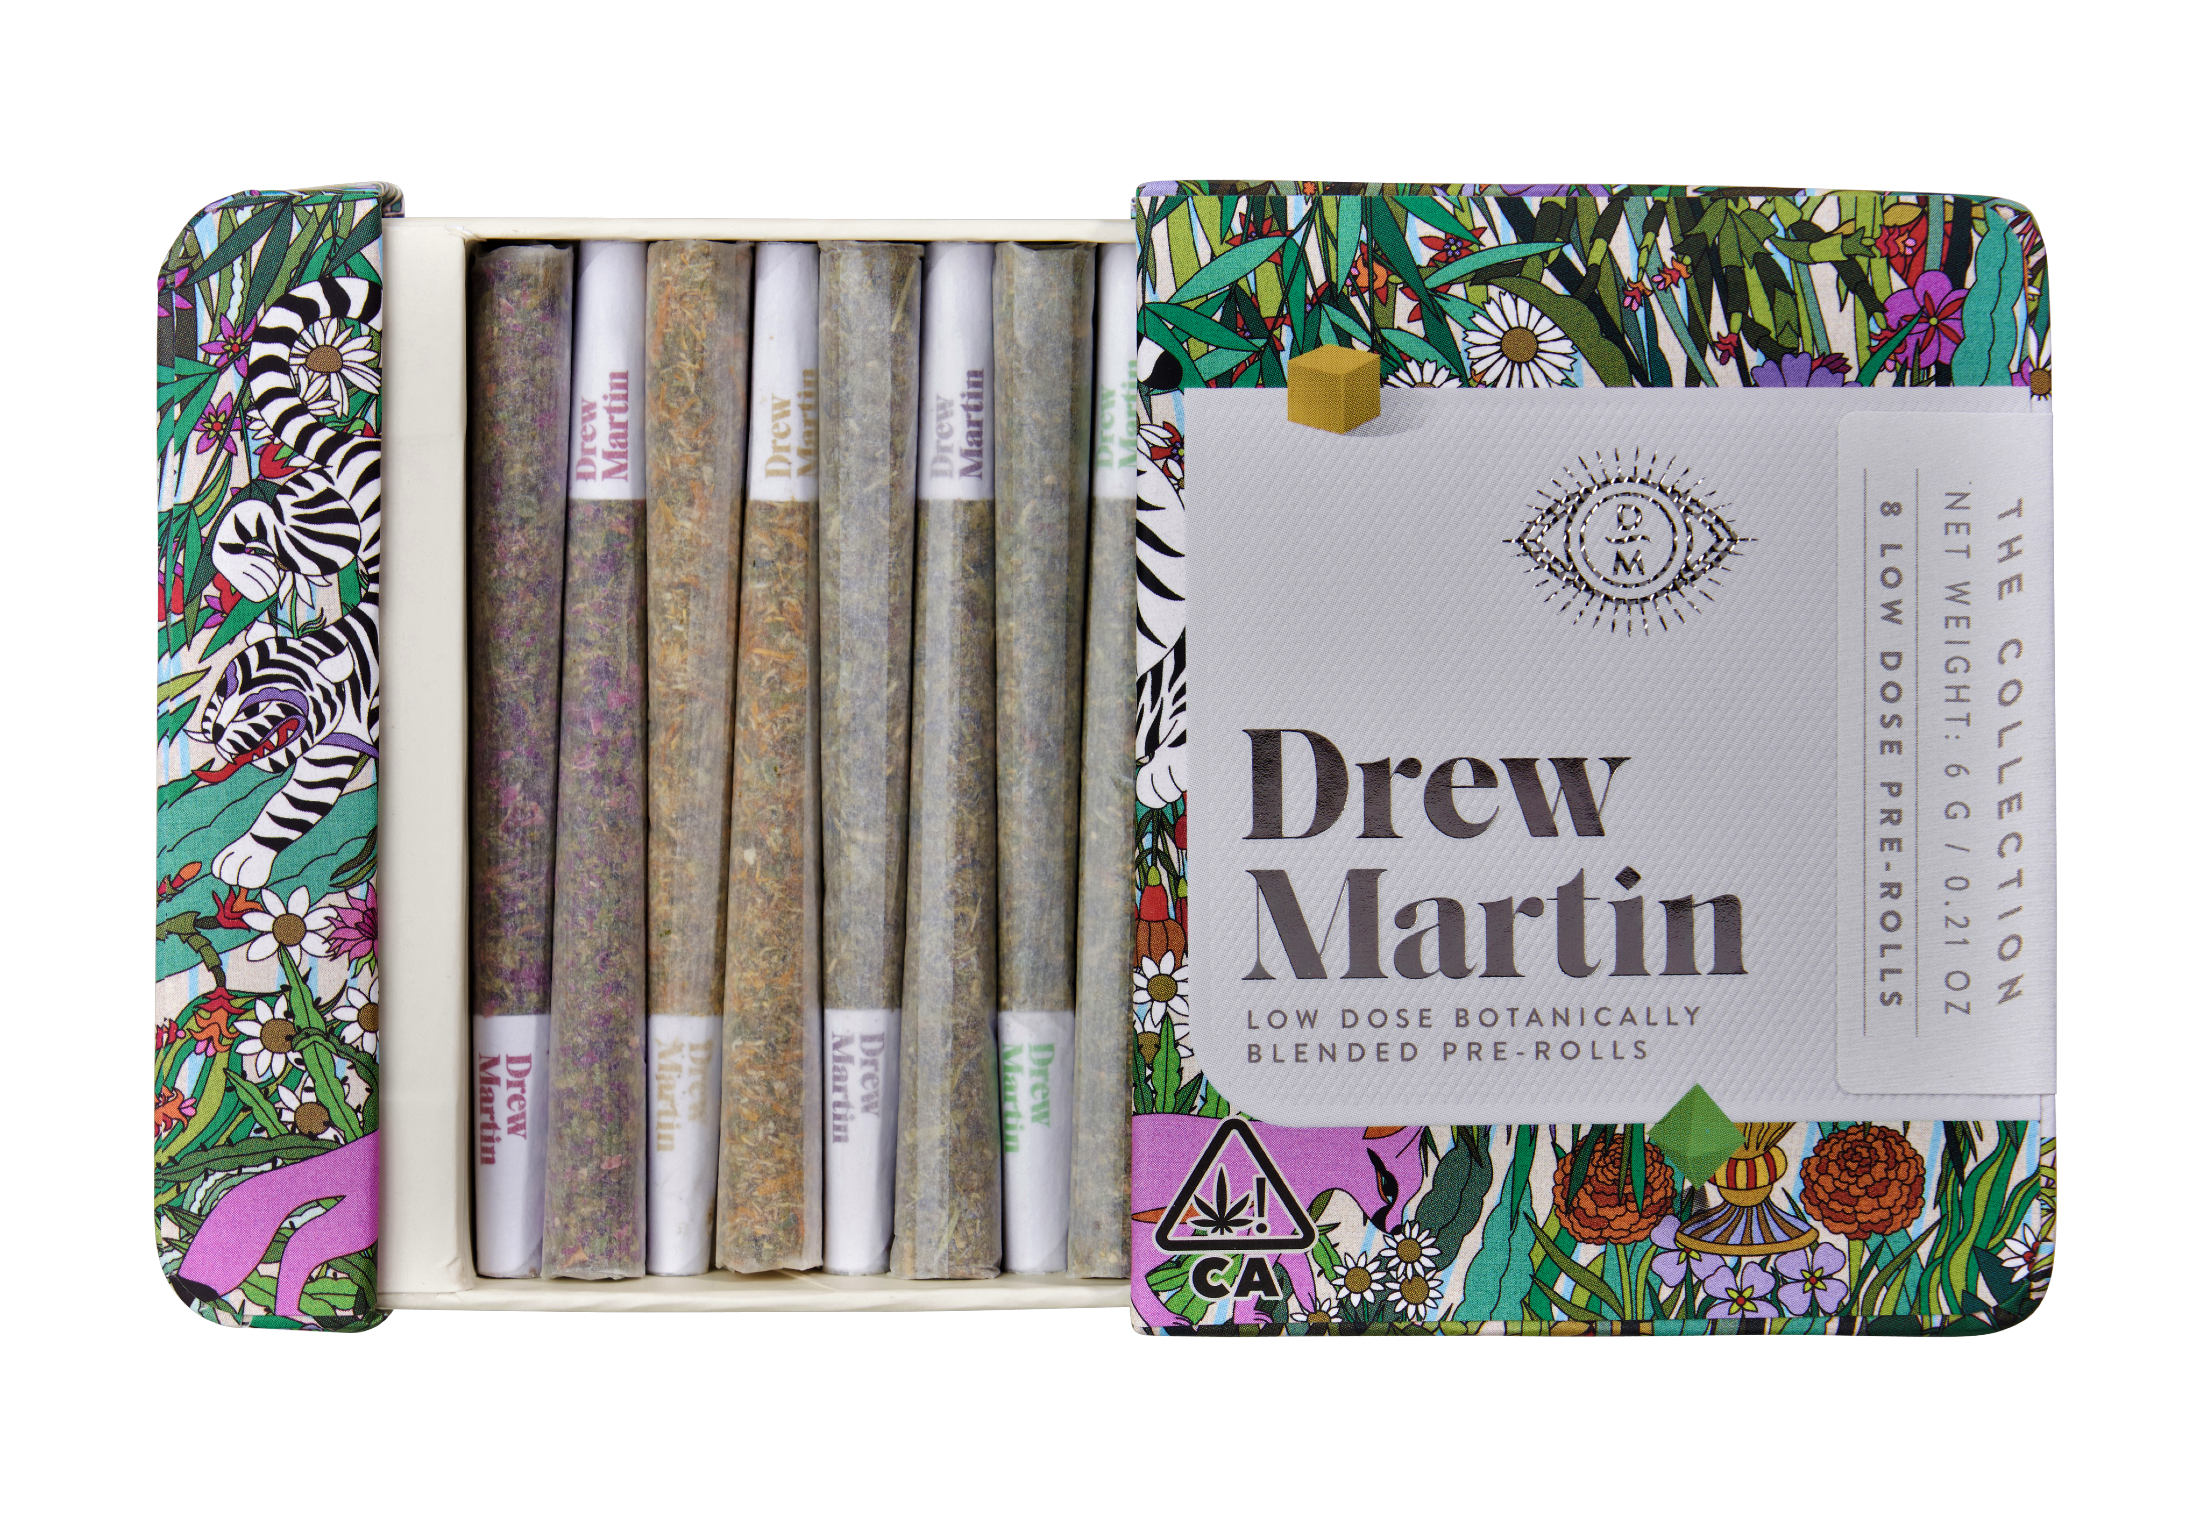 Emjay reviews the collection of botanic prerolls by cannabis company Drew Martin